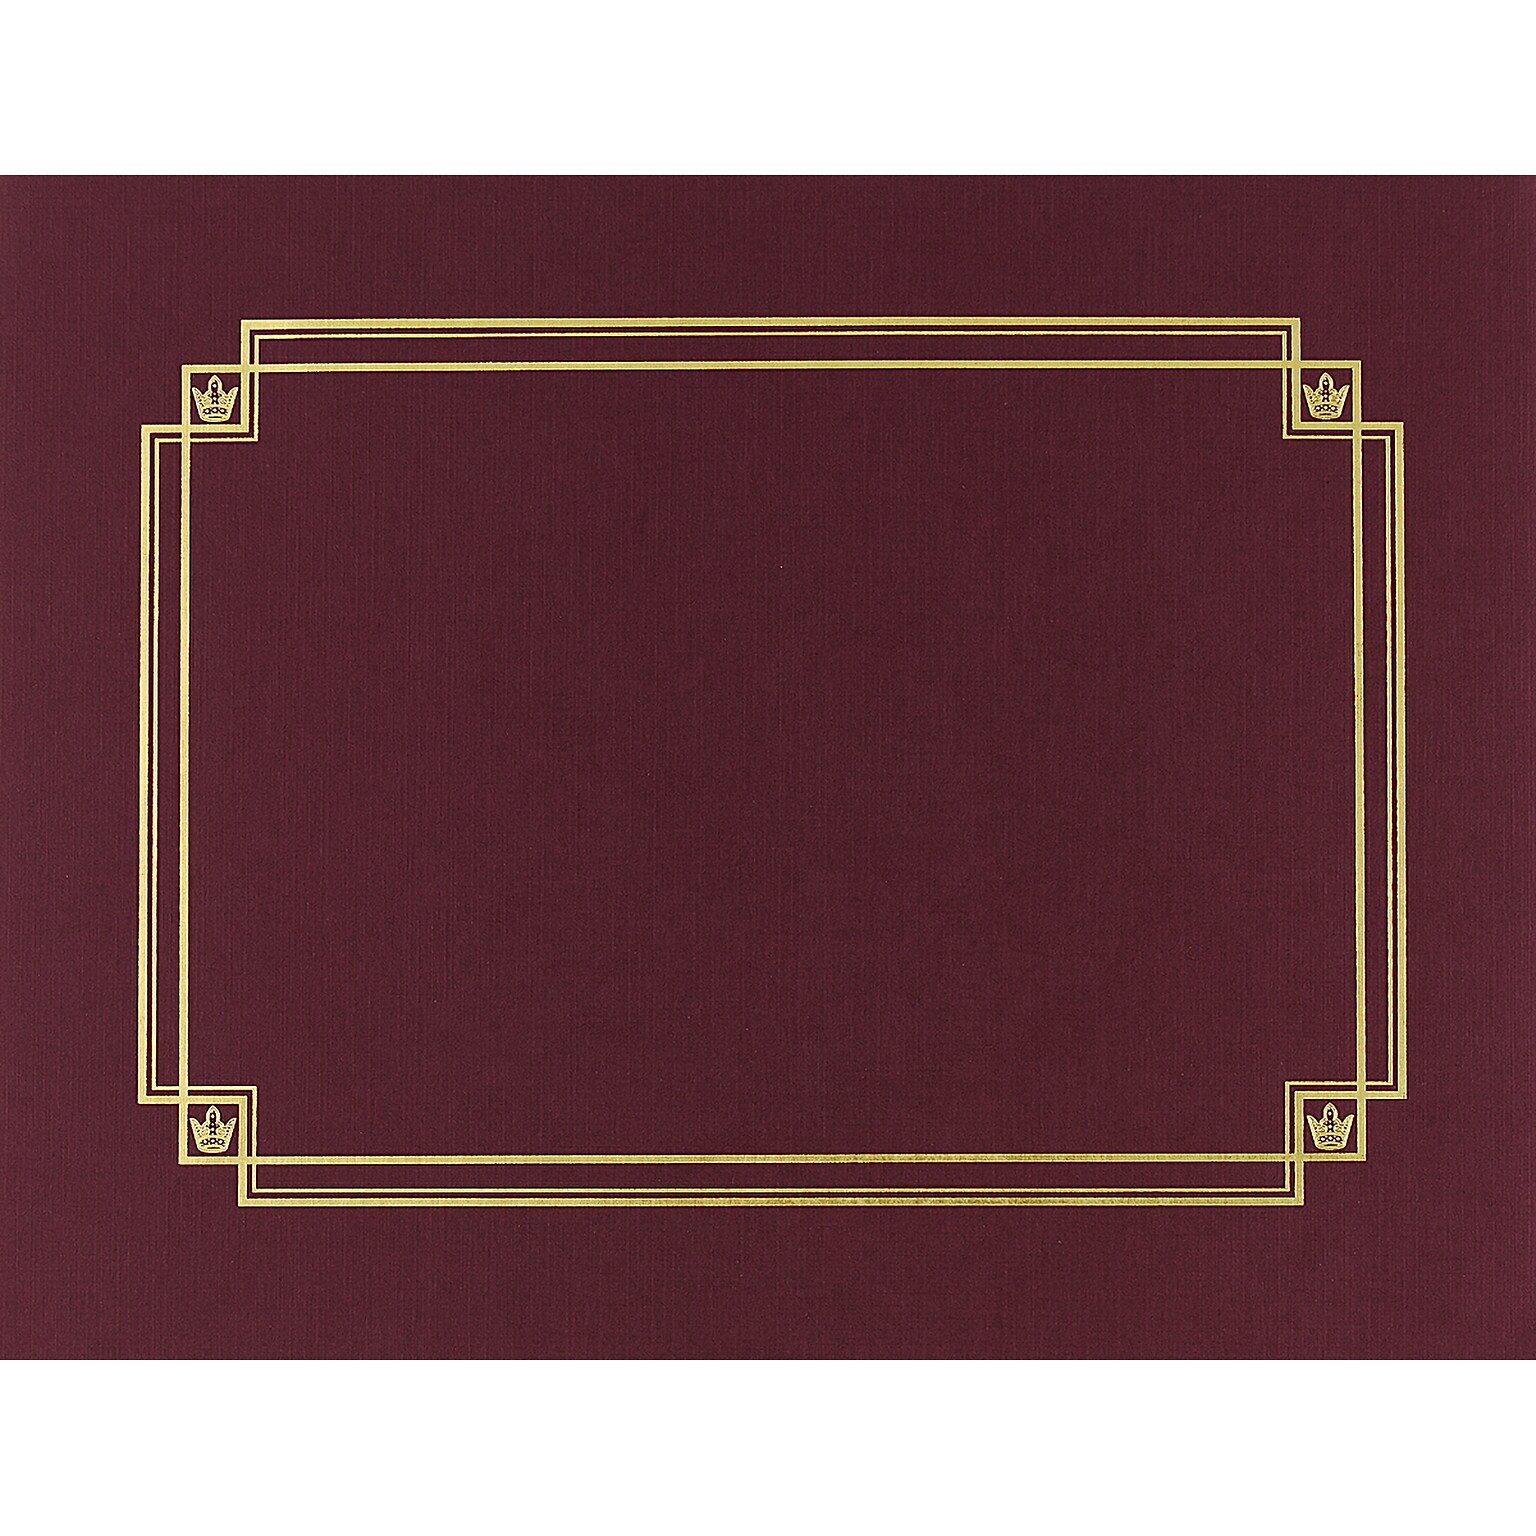 Great Papers Certificate Holders, 12, Burgundy, 3/Pack (939503)